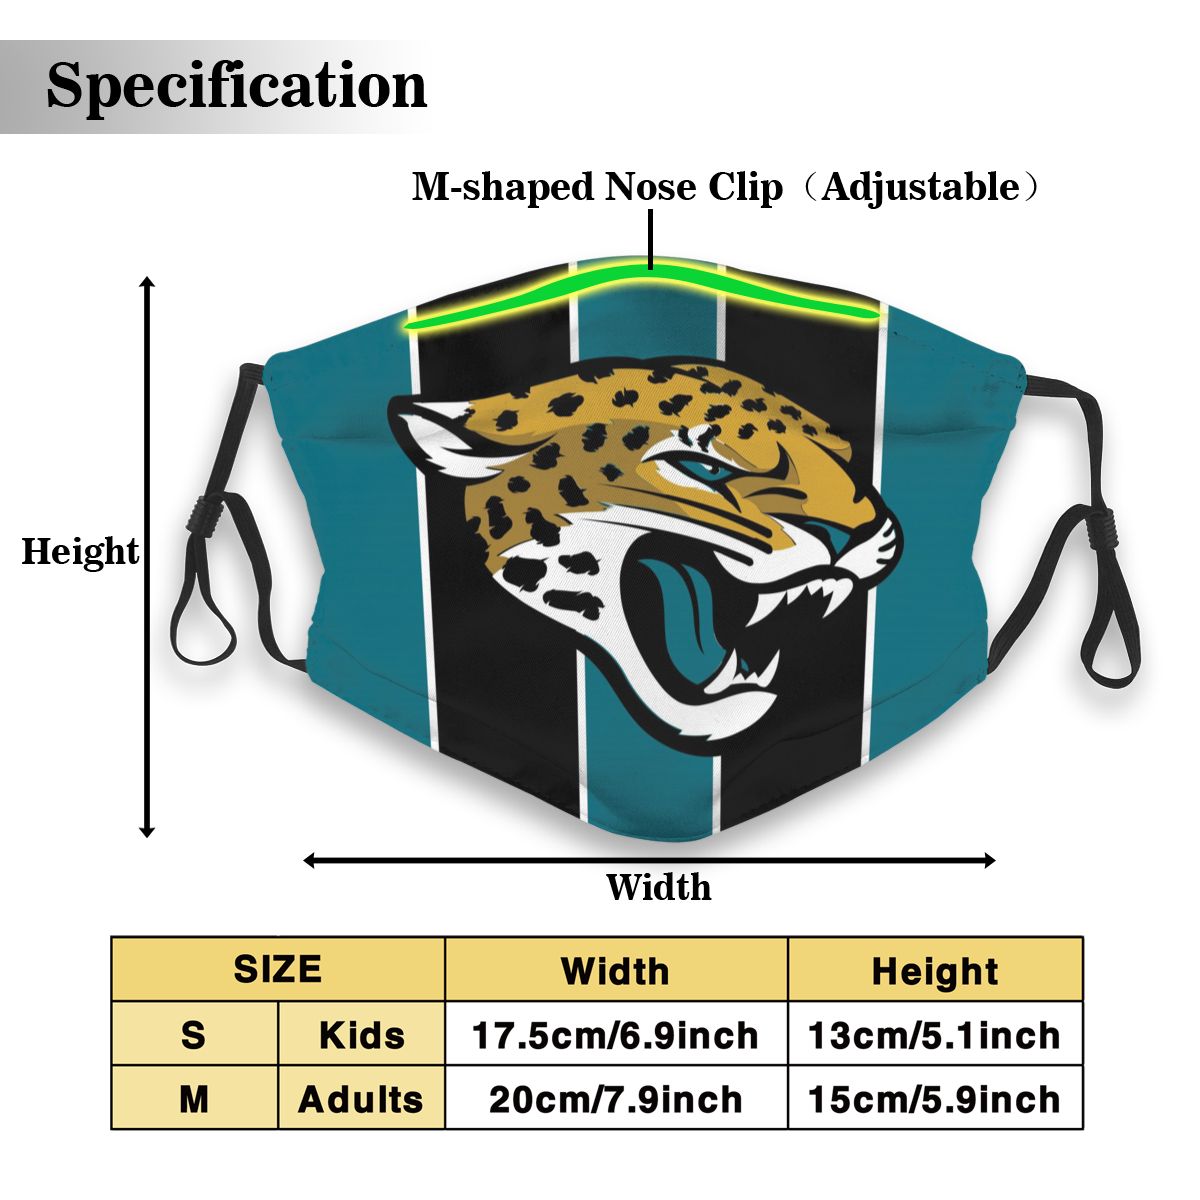 Custom Football Personalized J. Jaguar 01-Teal Dust Face Mask With Filters PM 2.5